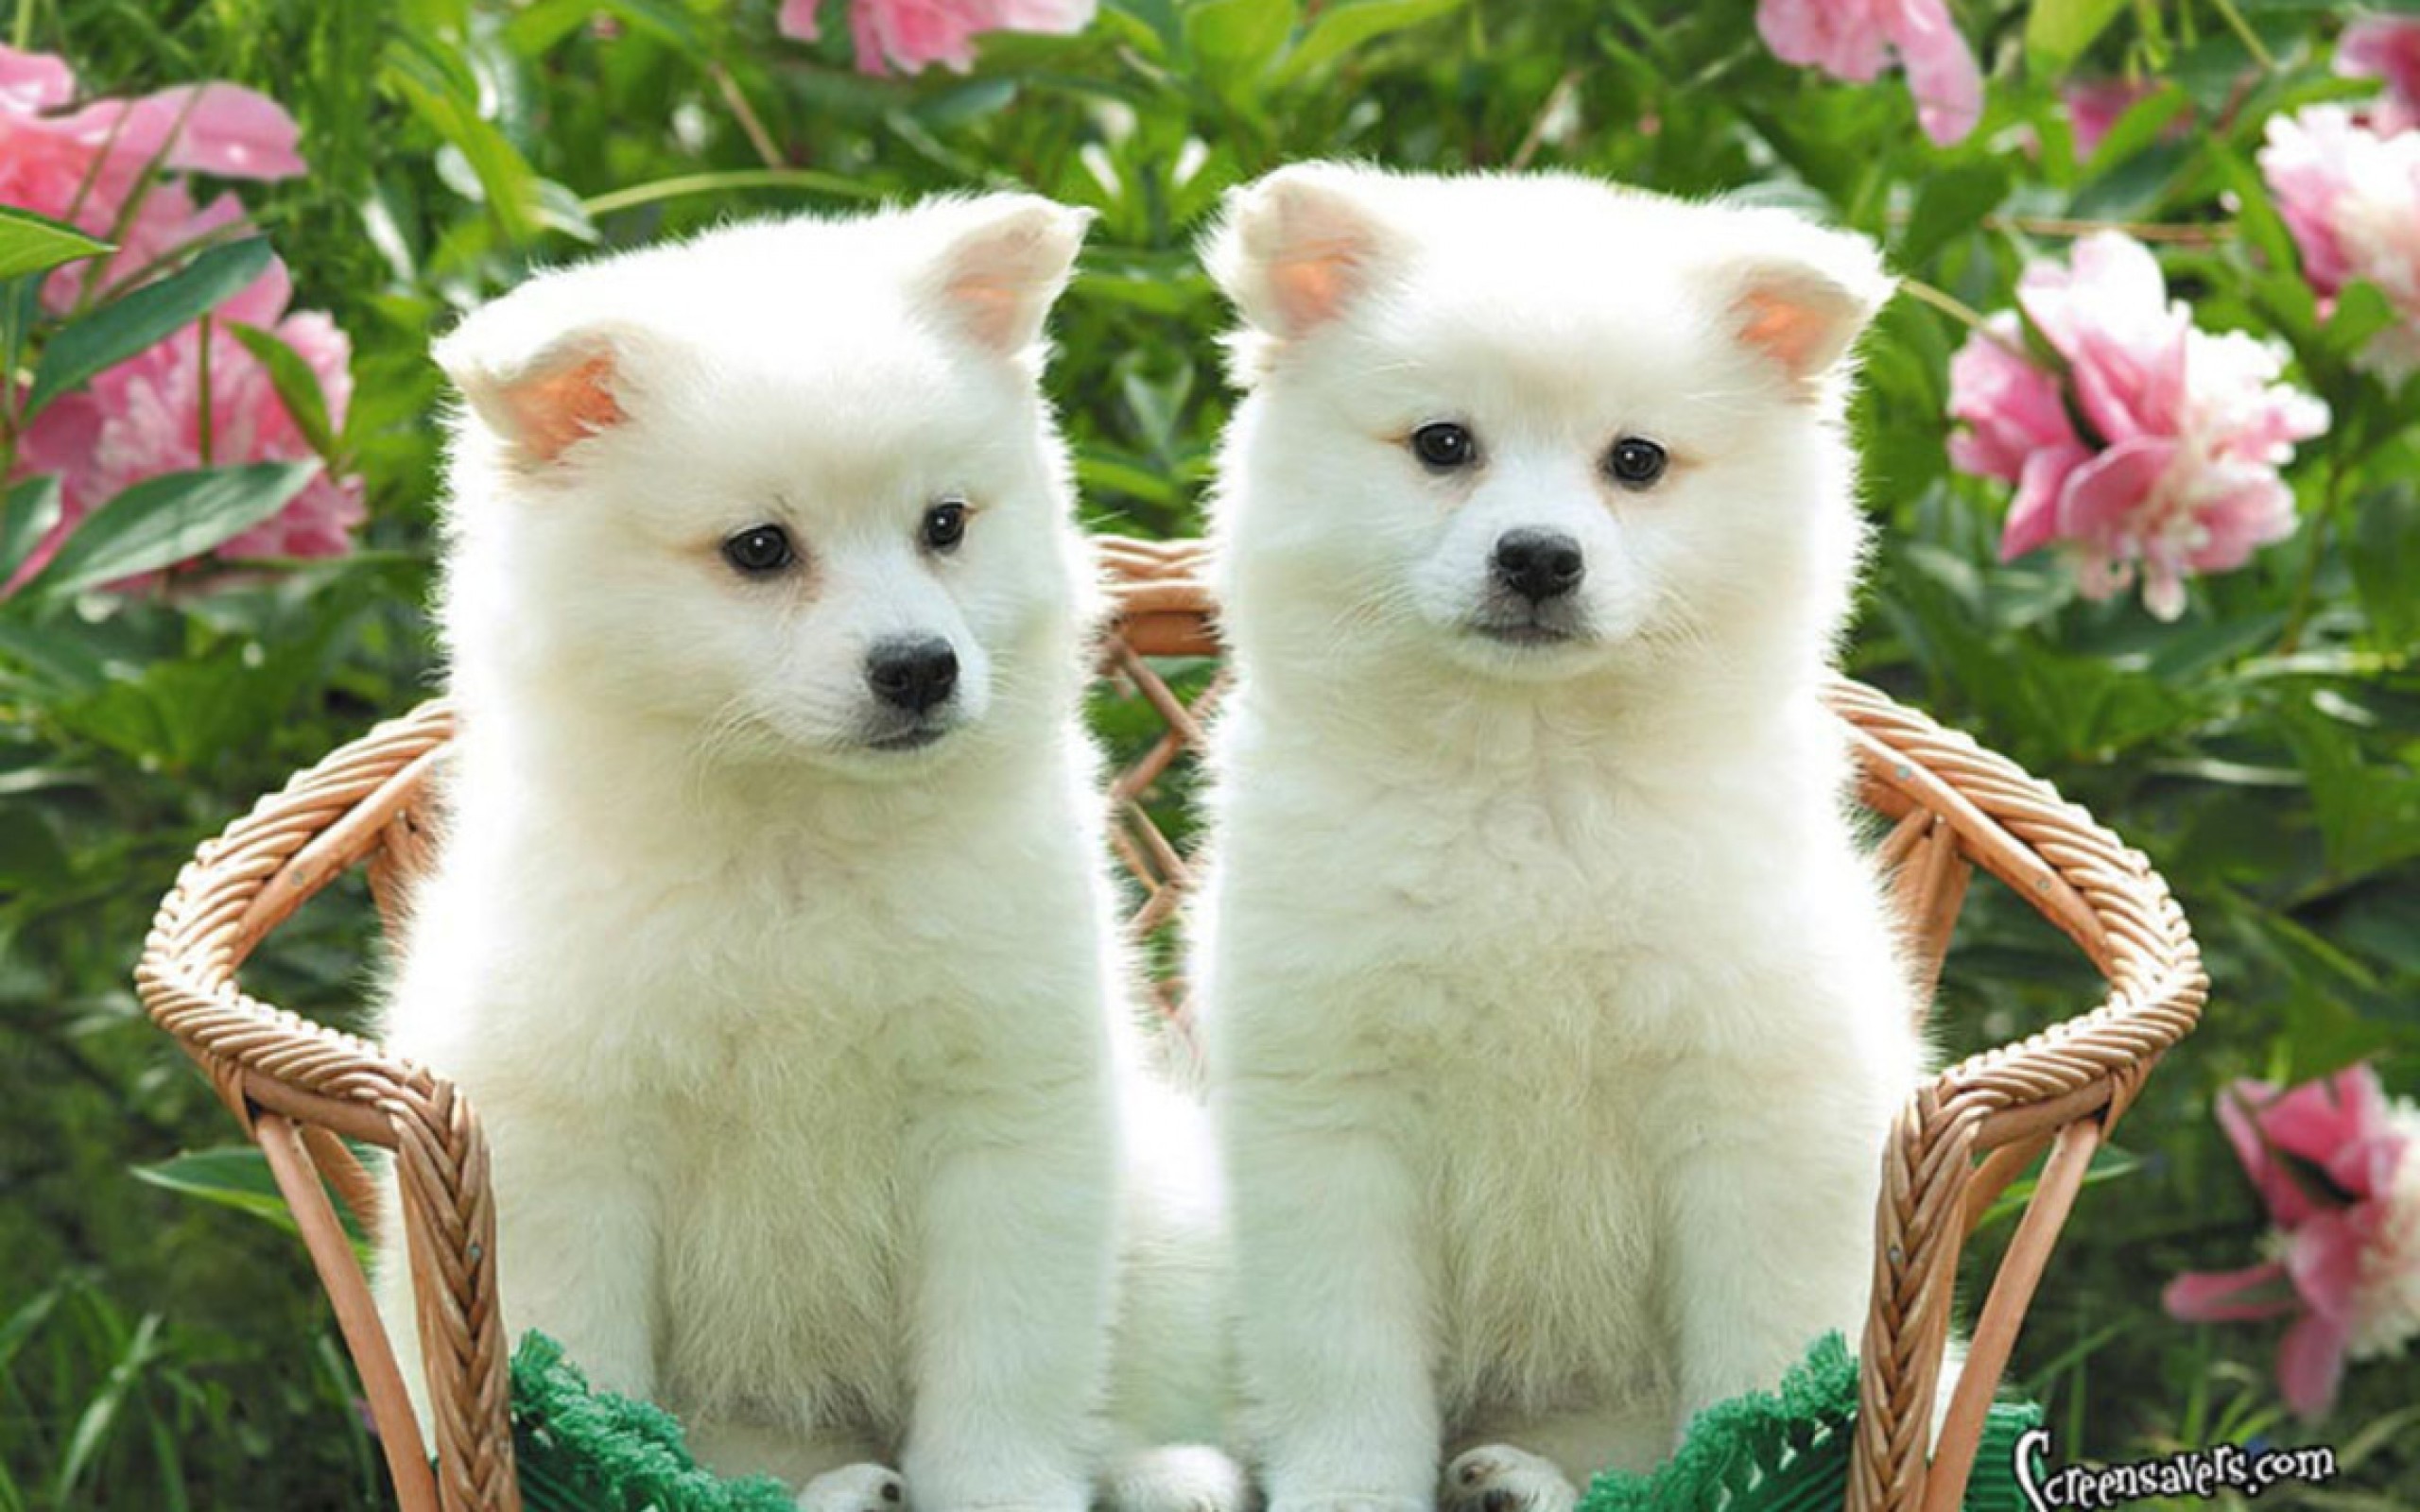 2560x1600 File Name: cutest-puppy-wallpaper-2.jpg. Text: Cute Baby Dogs ...